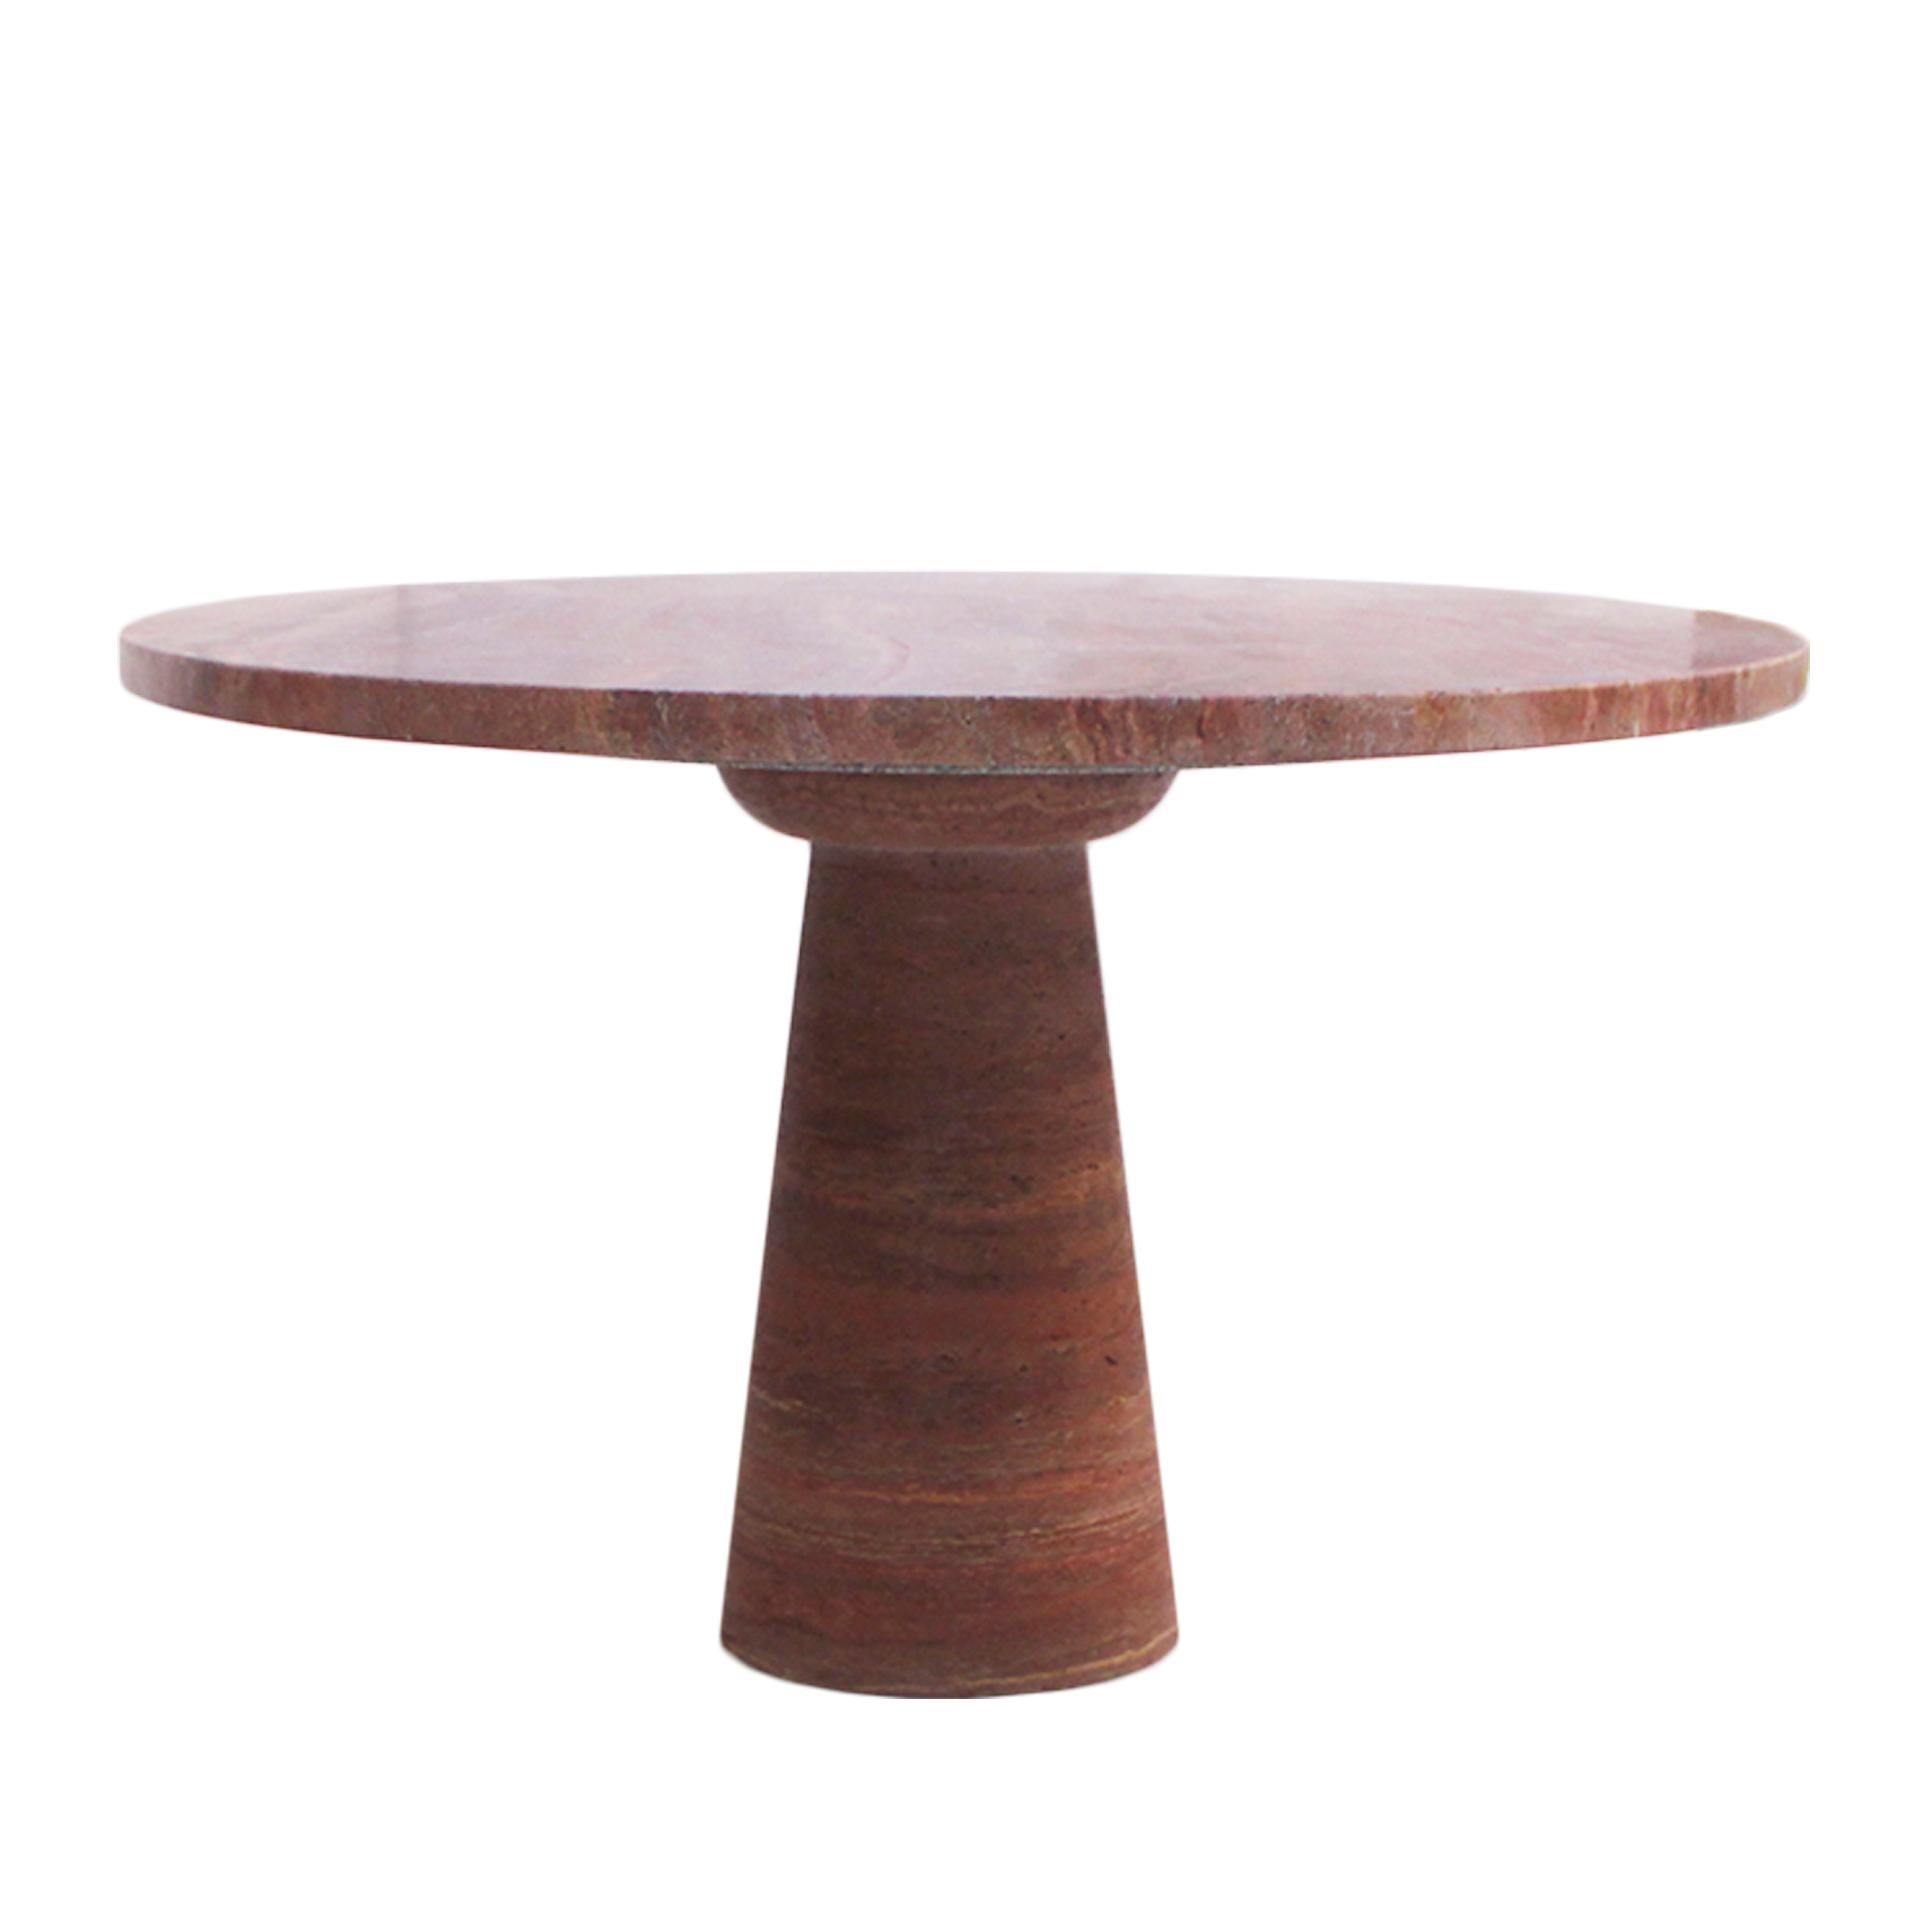 Italian Red Marble Persa Dining Table with Oval Top and Rounded Solid Legs In Good Condition For Sale In Ibiza, Spain